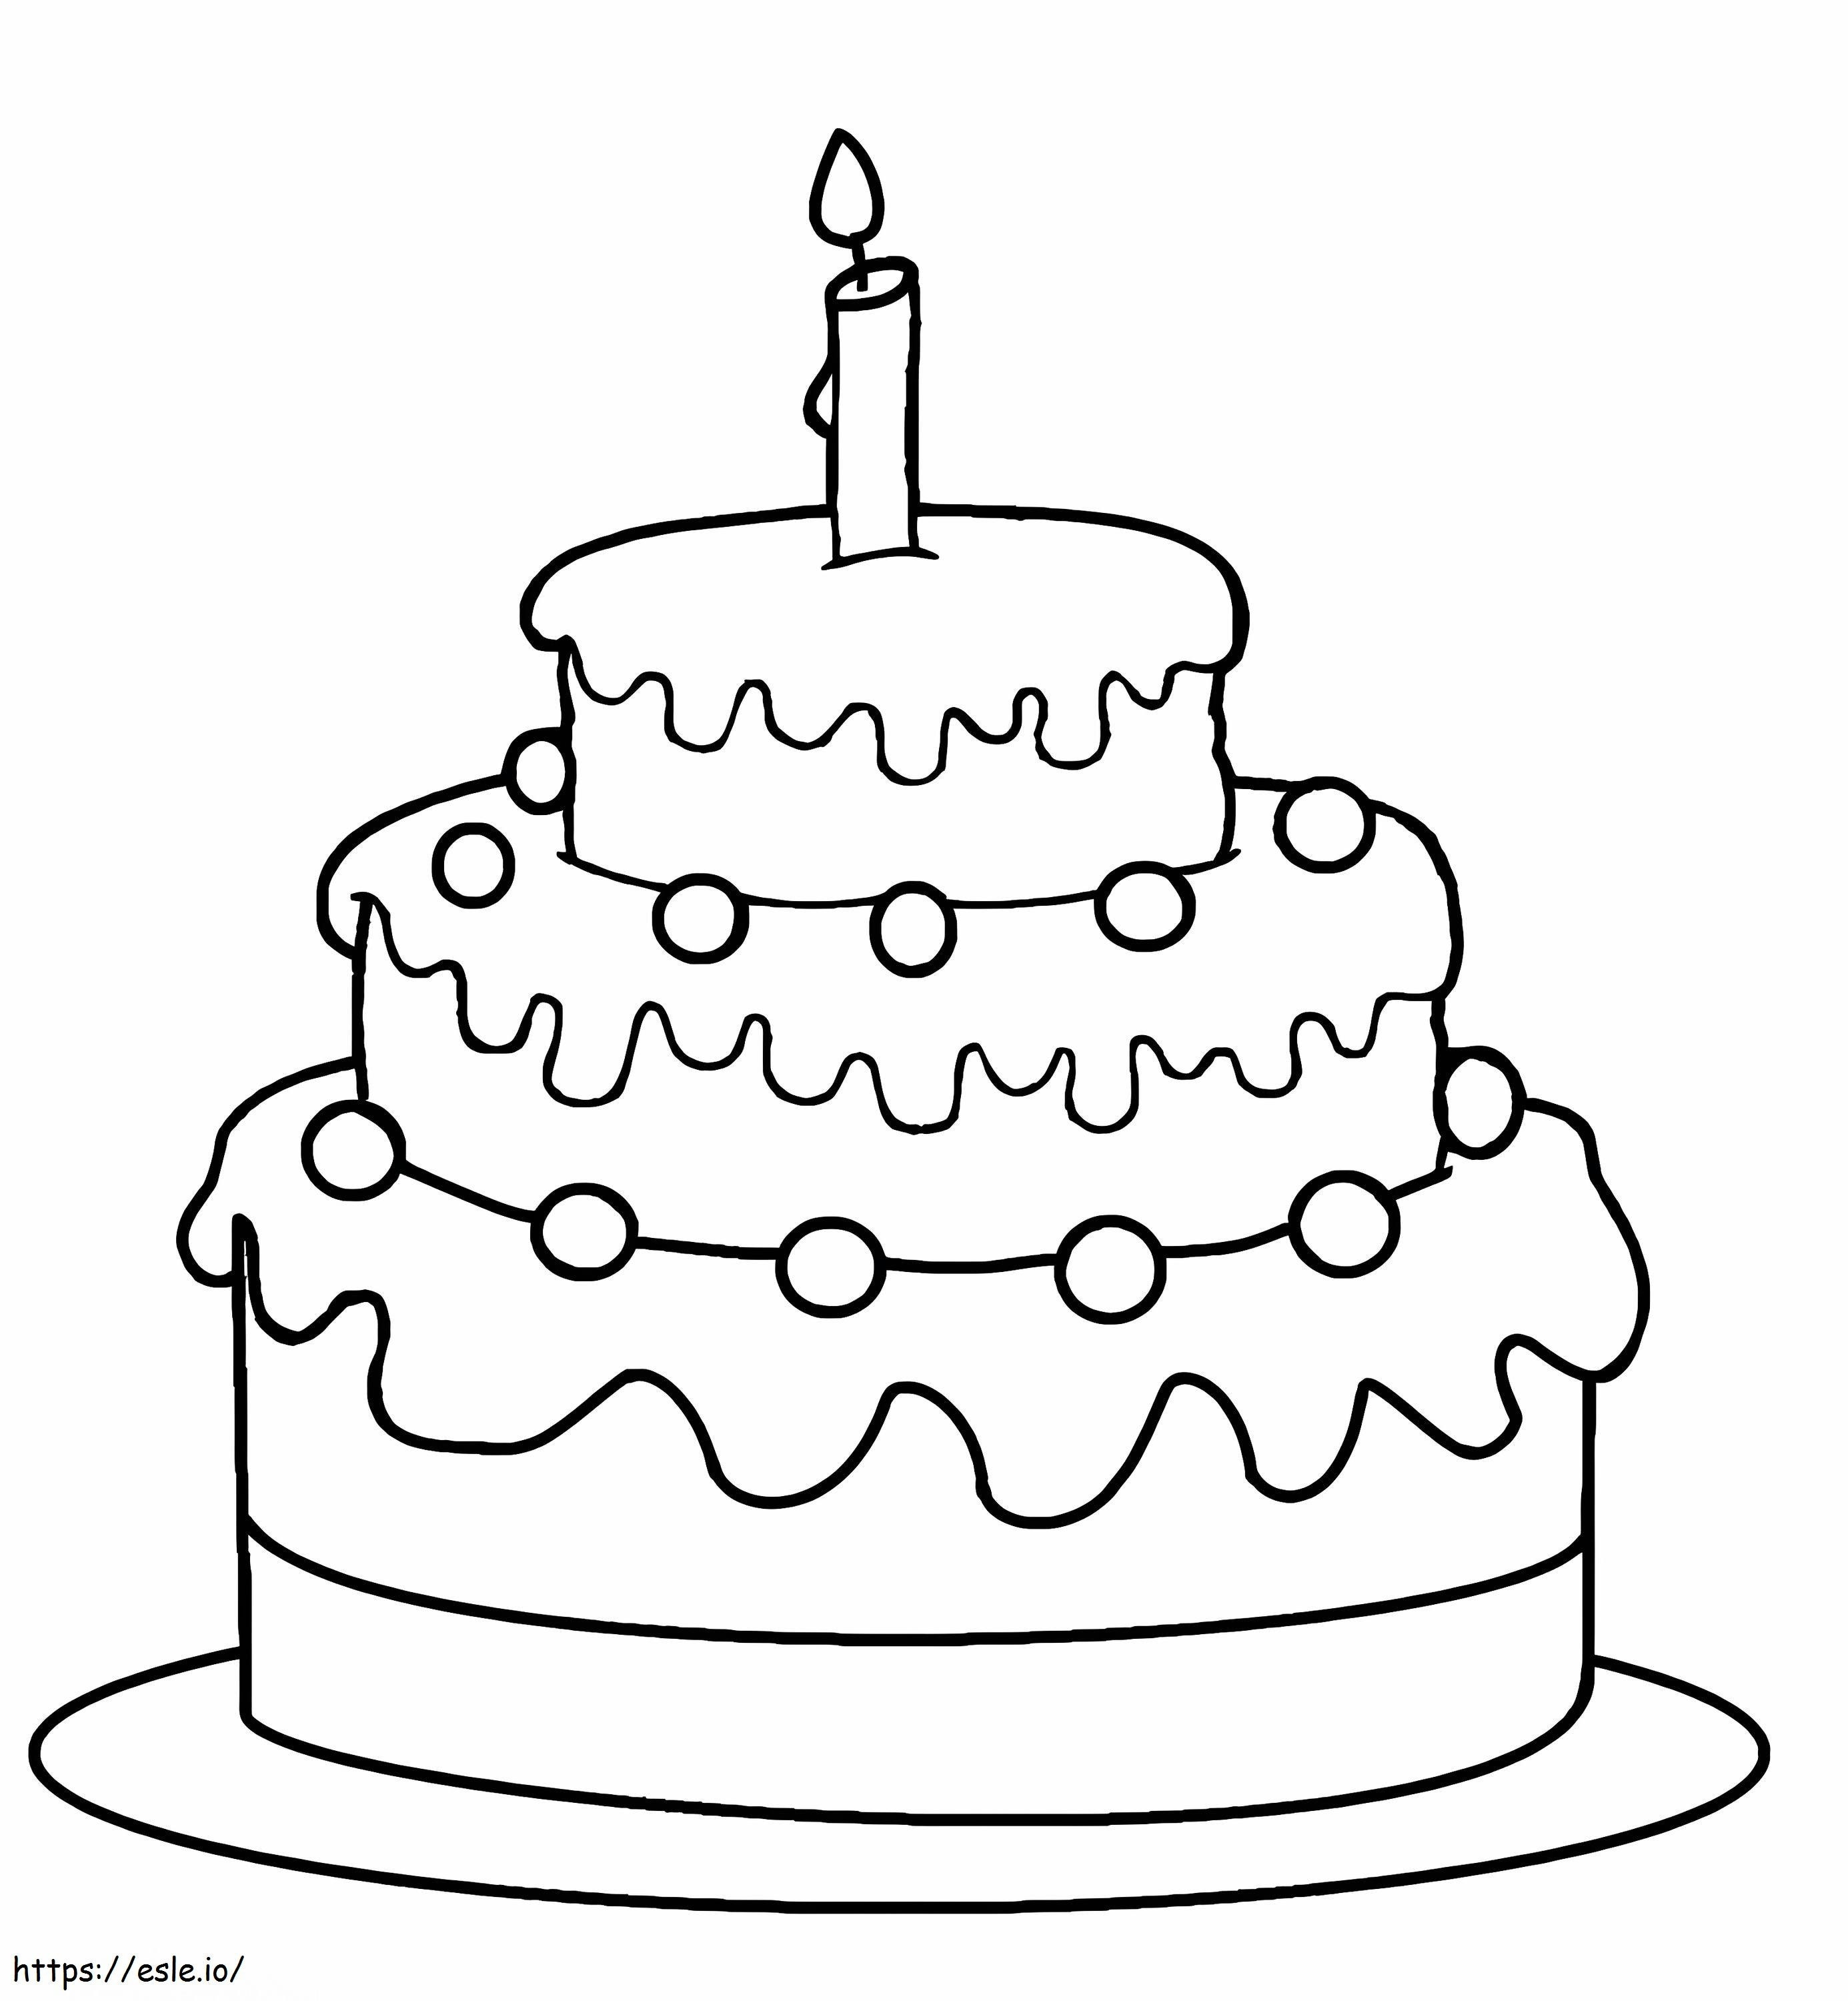 Birthday Cake 2 coloring page